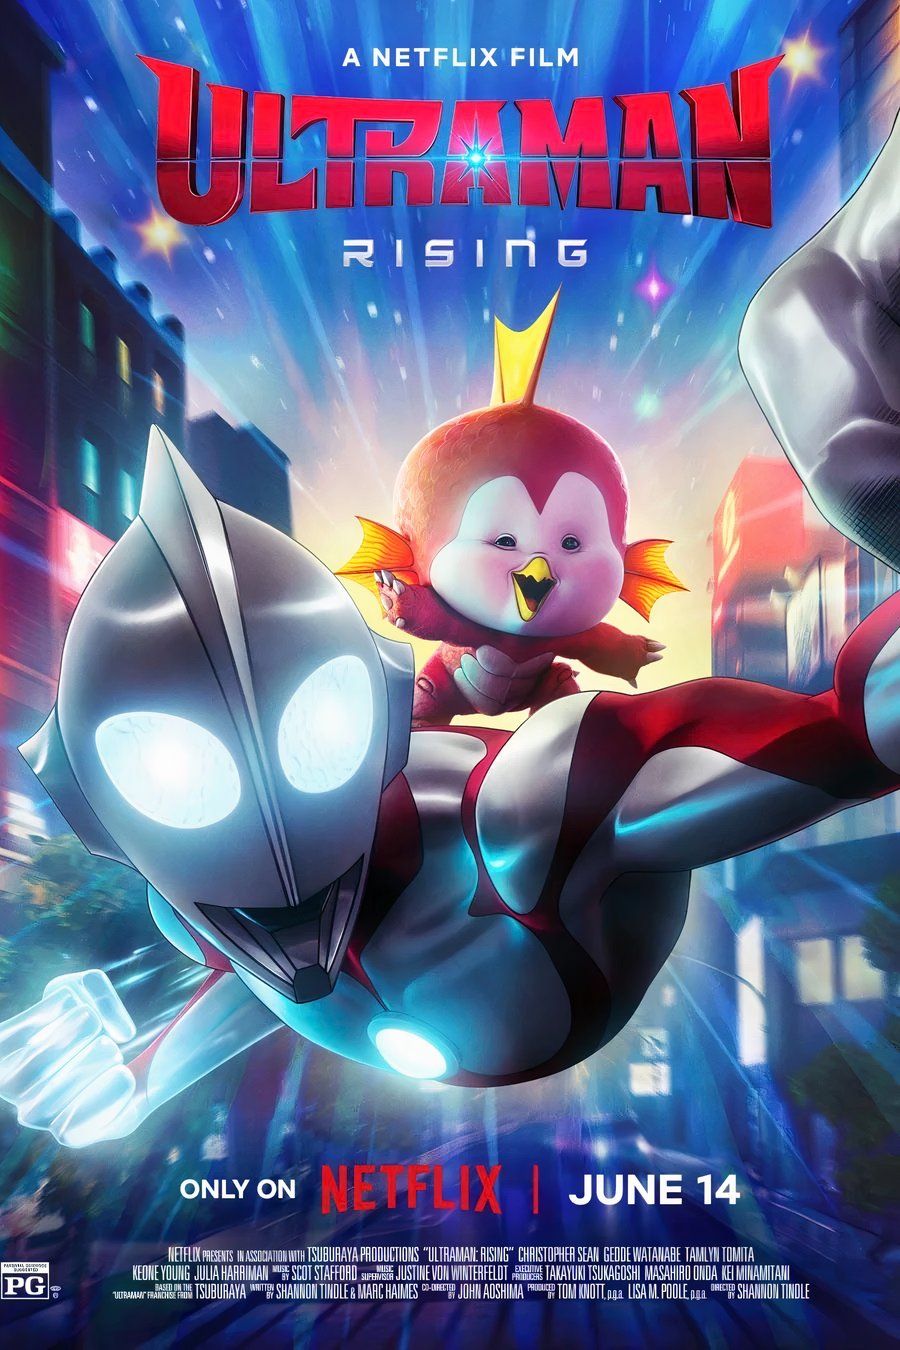 Ultraman Rising Poster Showing Ultraman flying through the sky with a small creature on his back